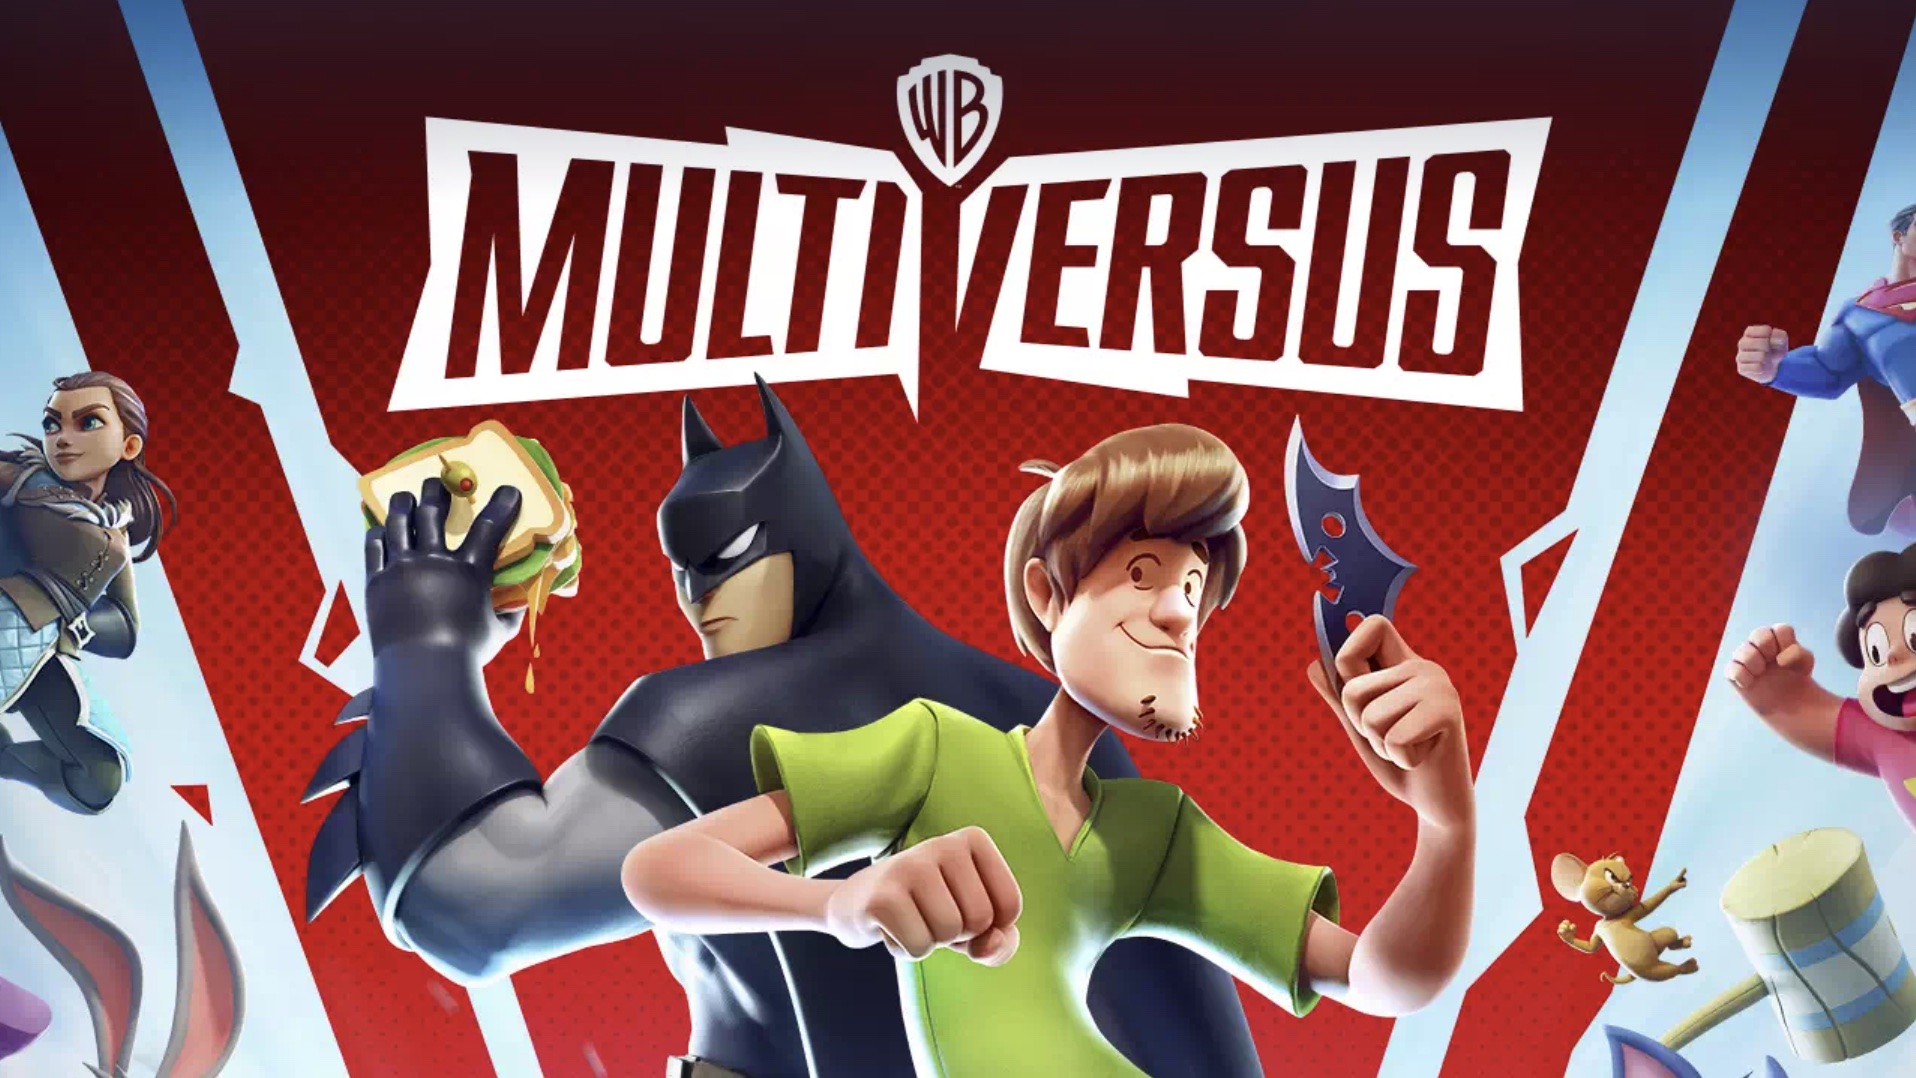 Multiversus lets you fight Batman with Shaggy from Scooby Doo - SoyaCincau